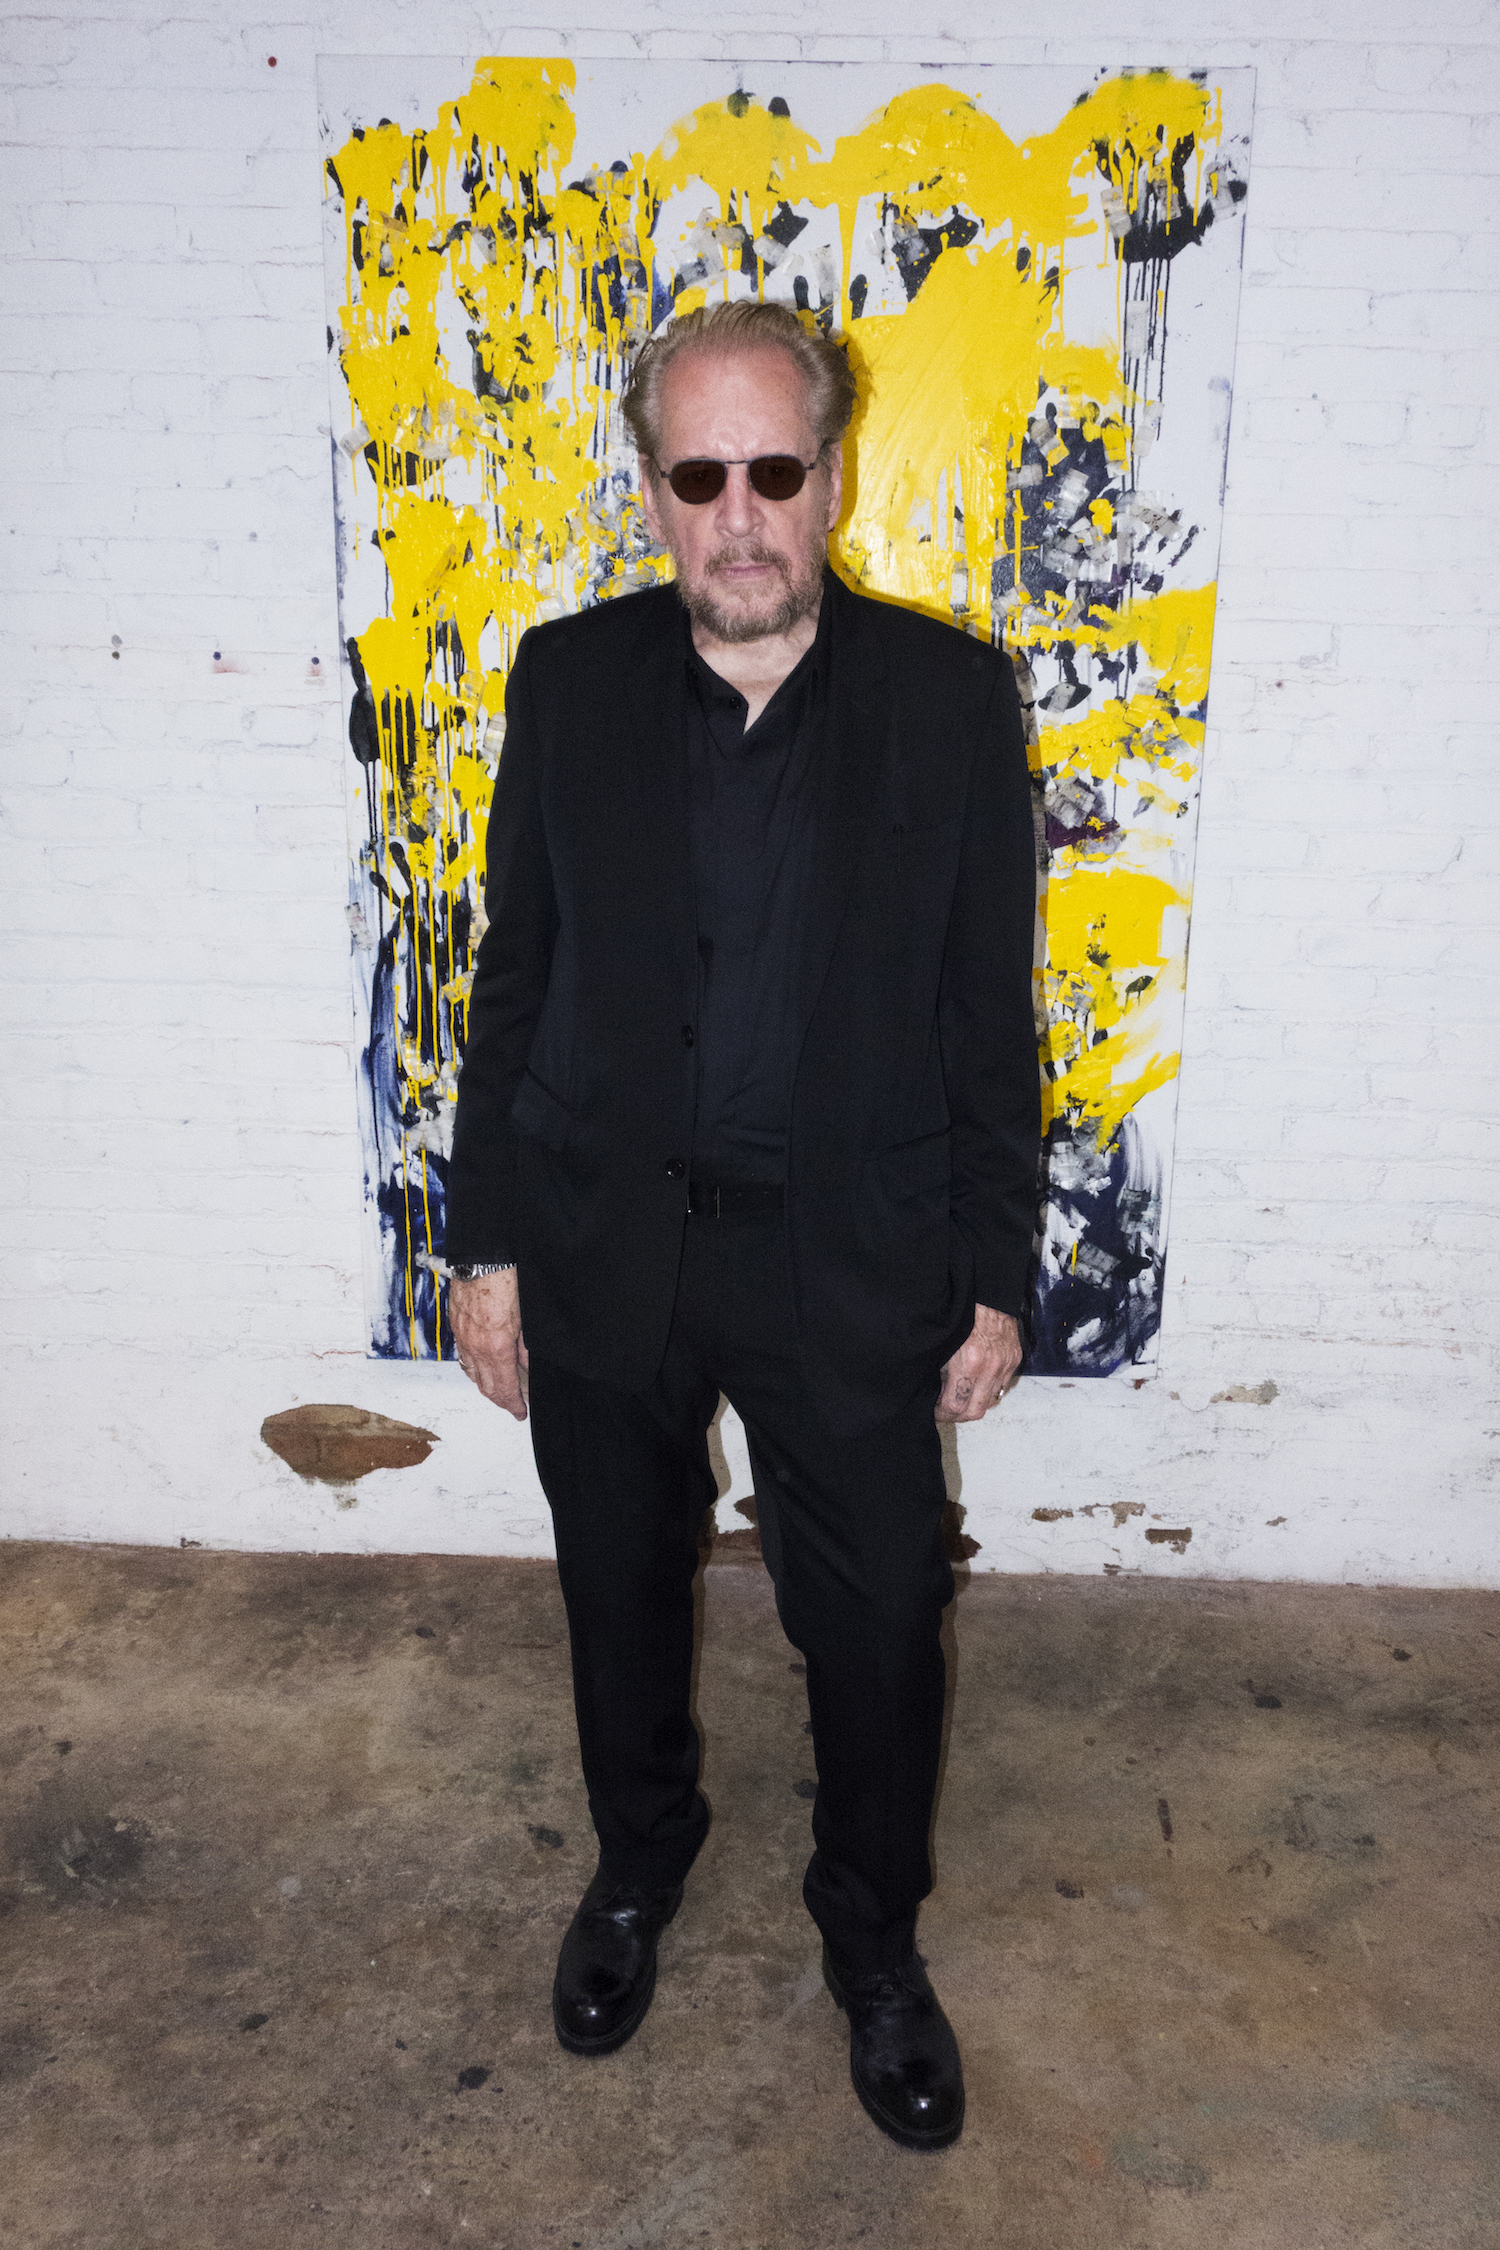 at the opening of Larry Clark's new show at UTA Artist Space in Los Angeles. Courtesy of Paige Silveria.